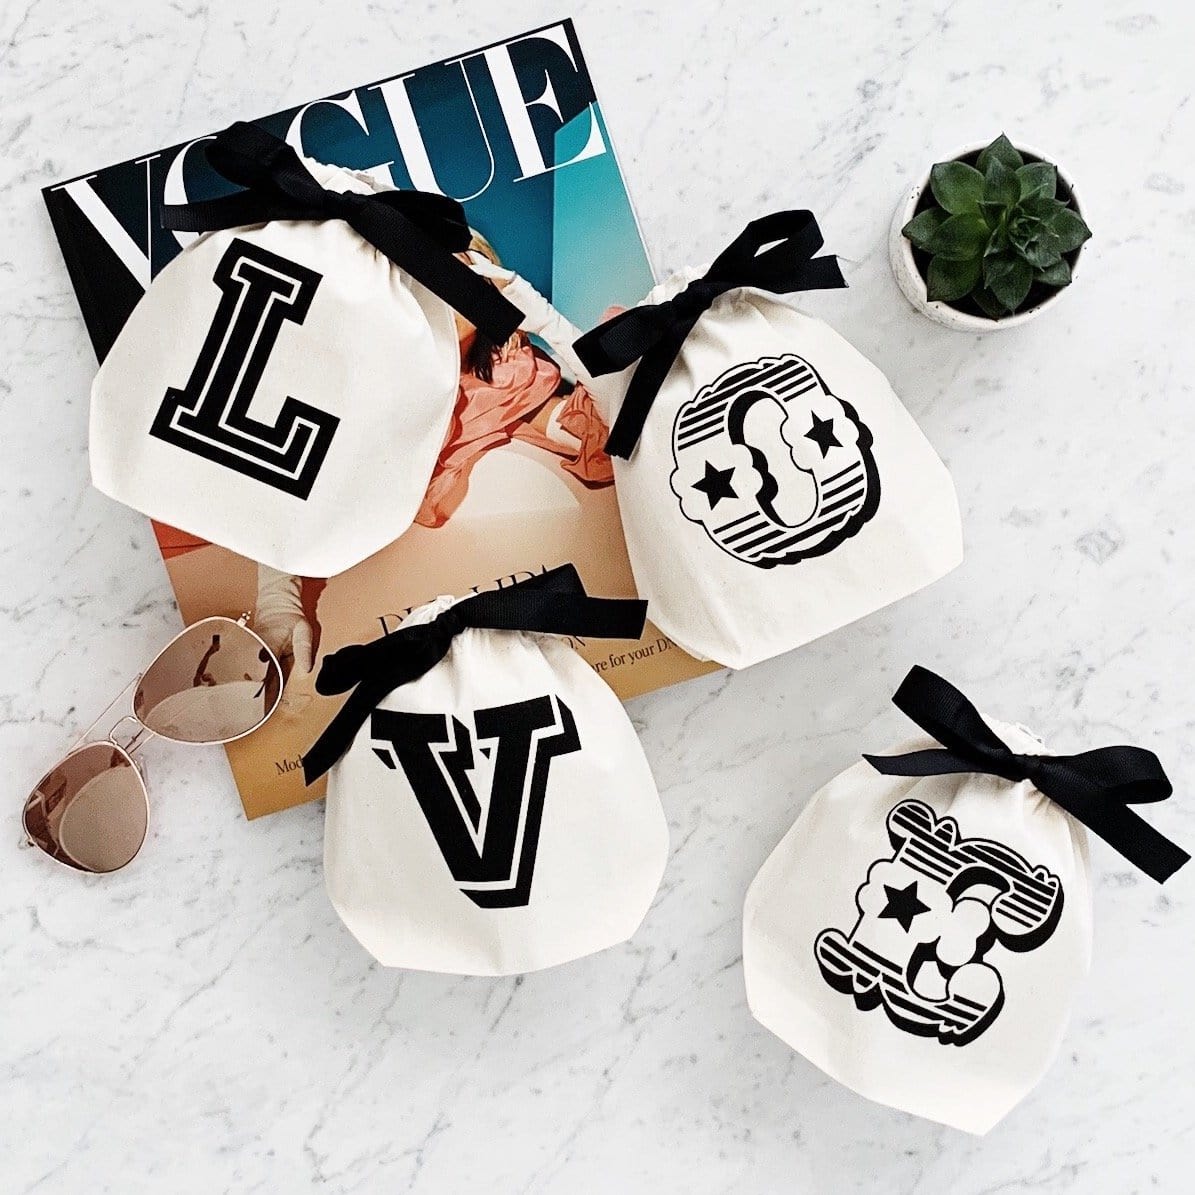 "LOVE" spelt out with small letter bags. 